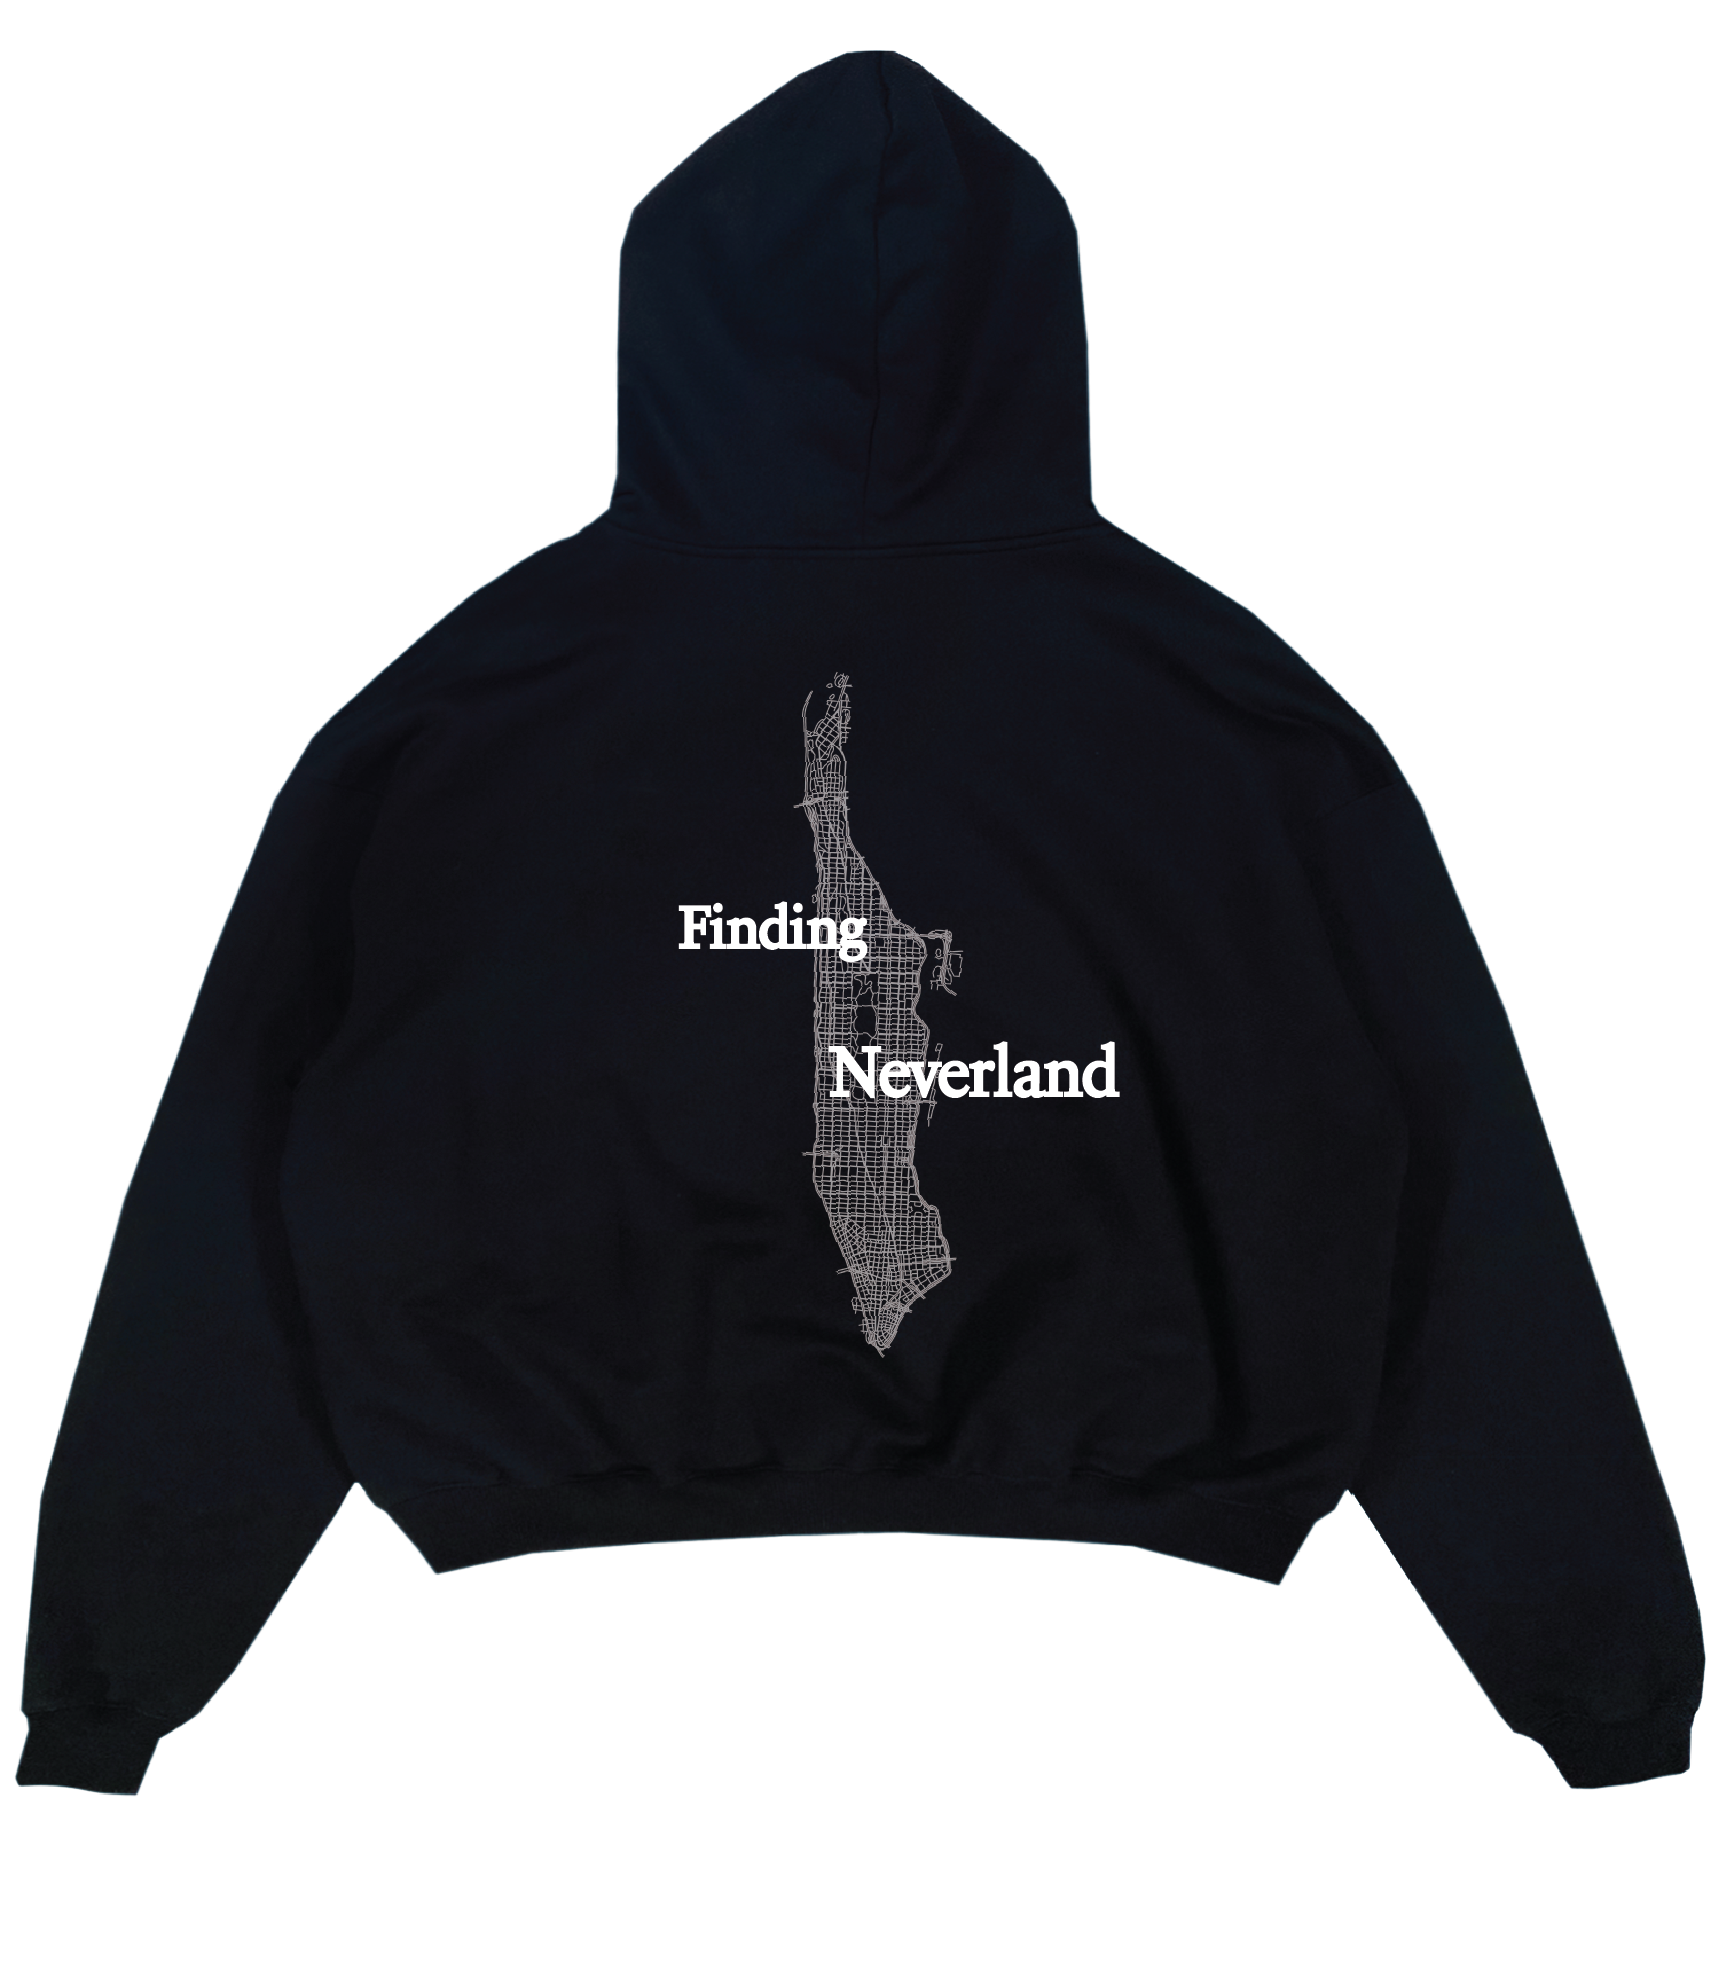 10025 Studios Black french terry Neverland hoodie